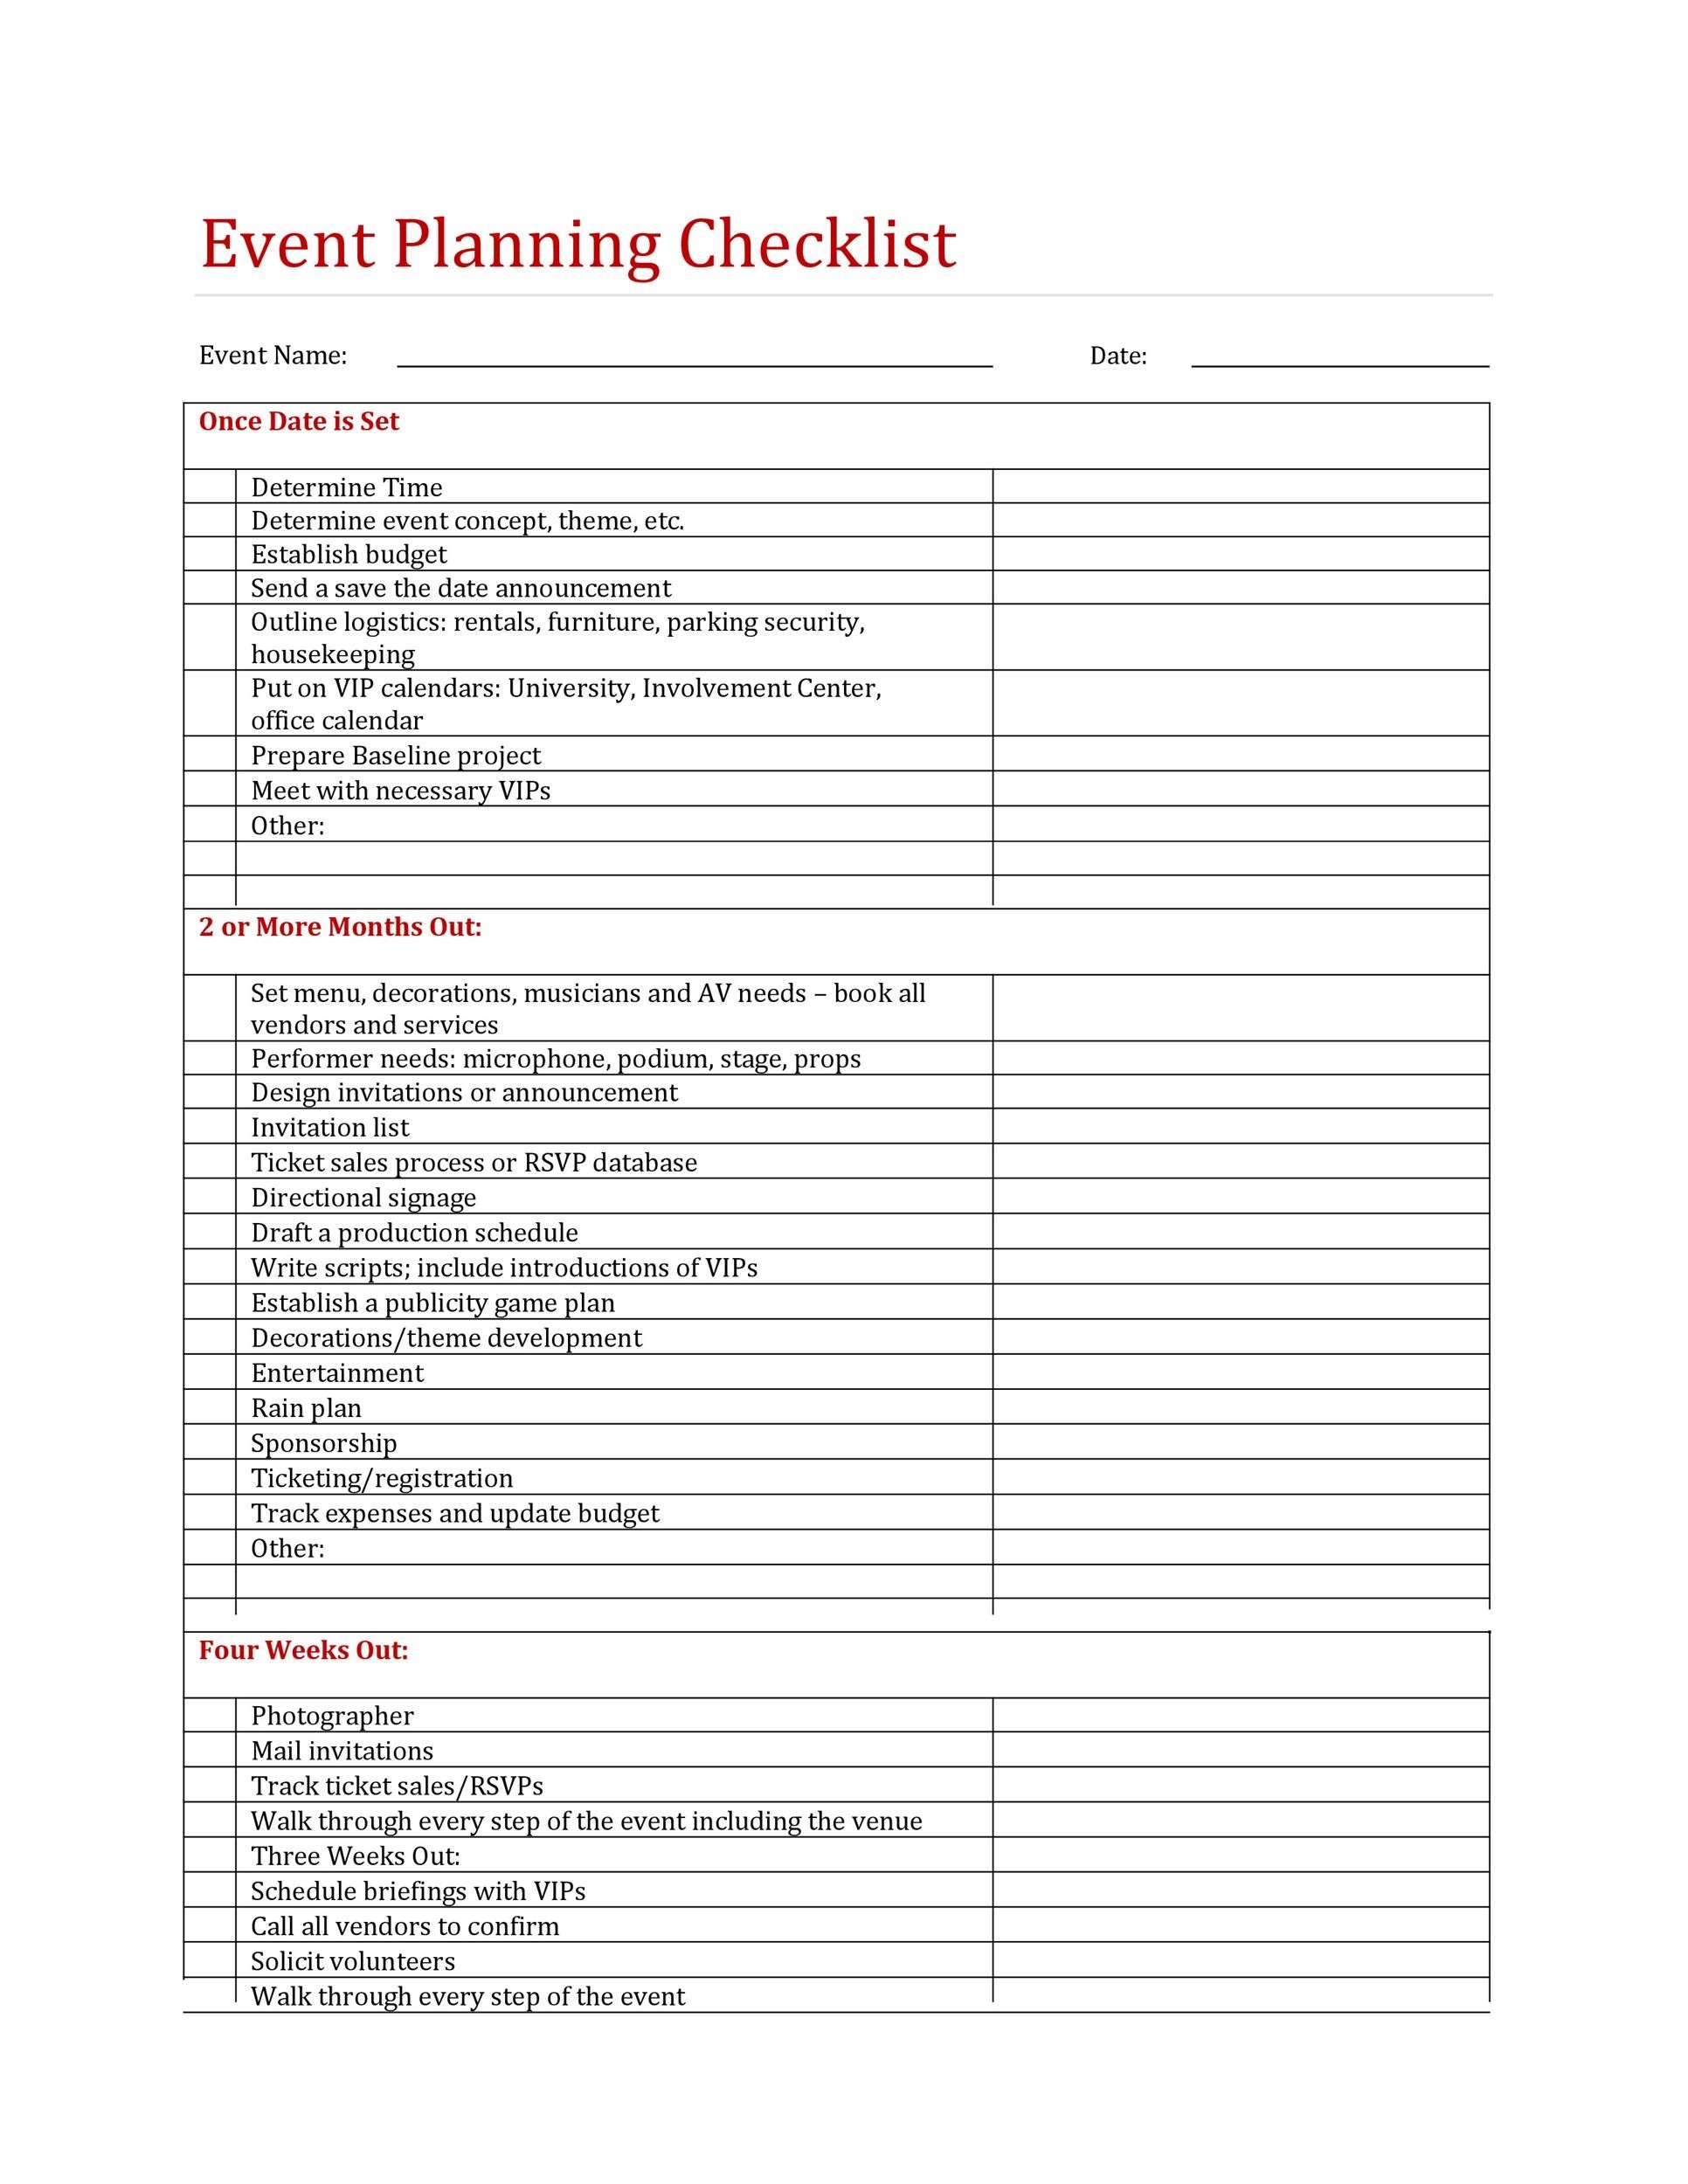 printable-event-planning-checklist-template-customize-and-print